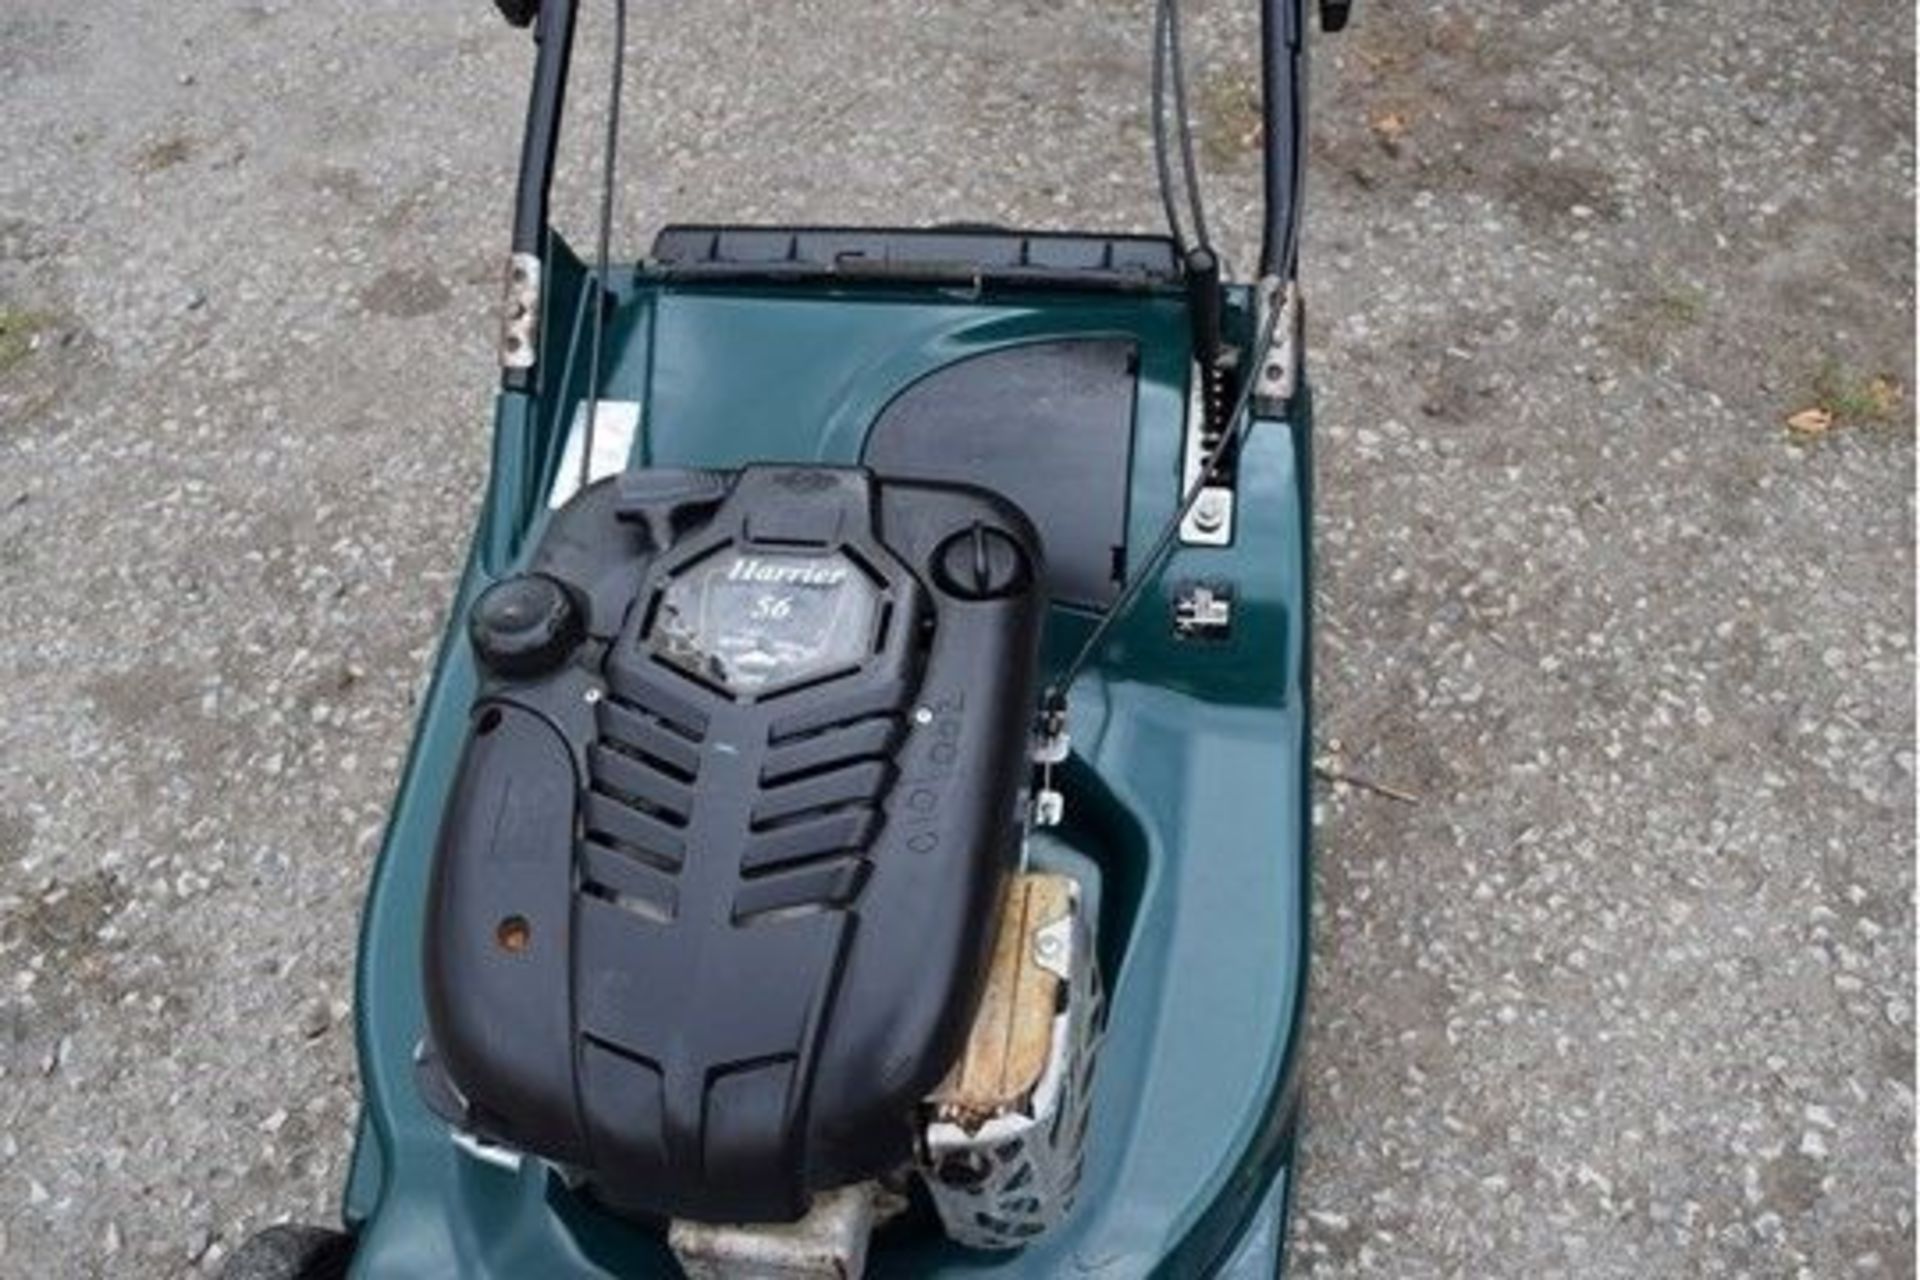 2008 Hayter Harrier 56 Auto Drive Variable Speed 22" Lawn Mower - Image 6 of 6